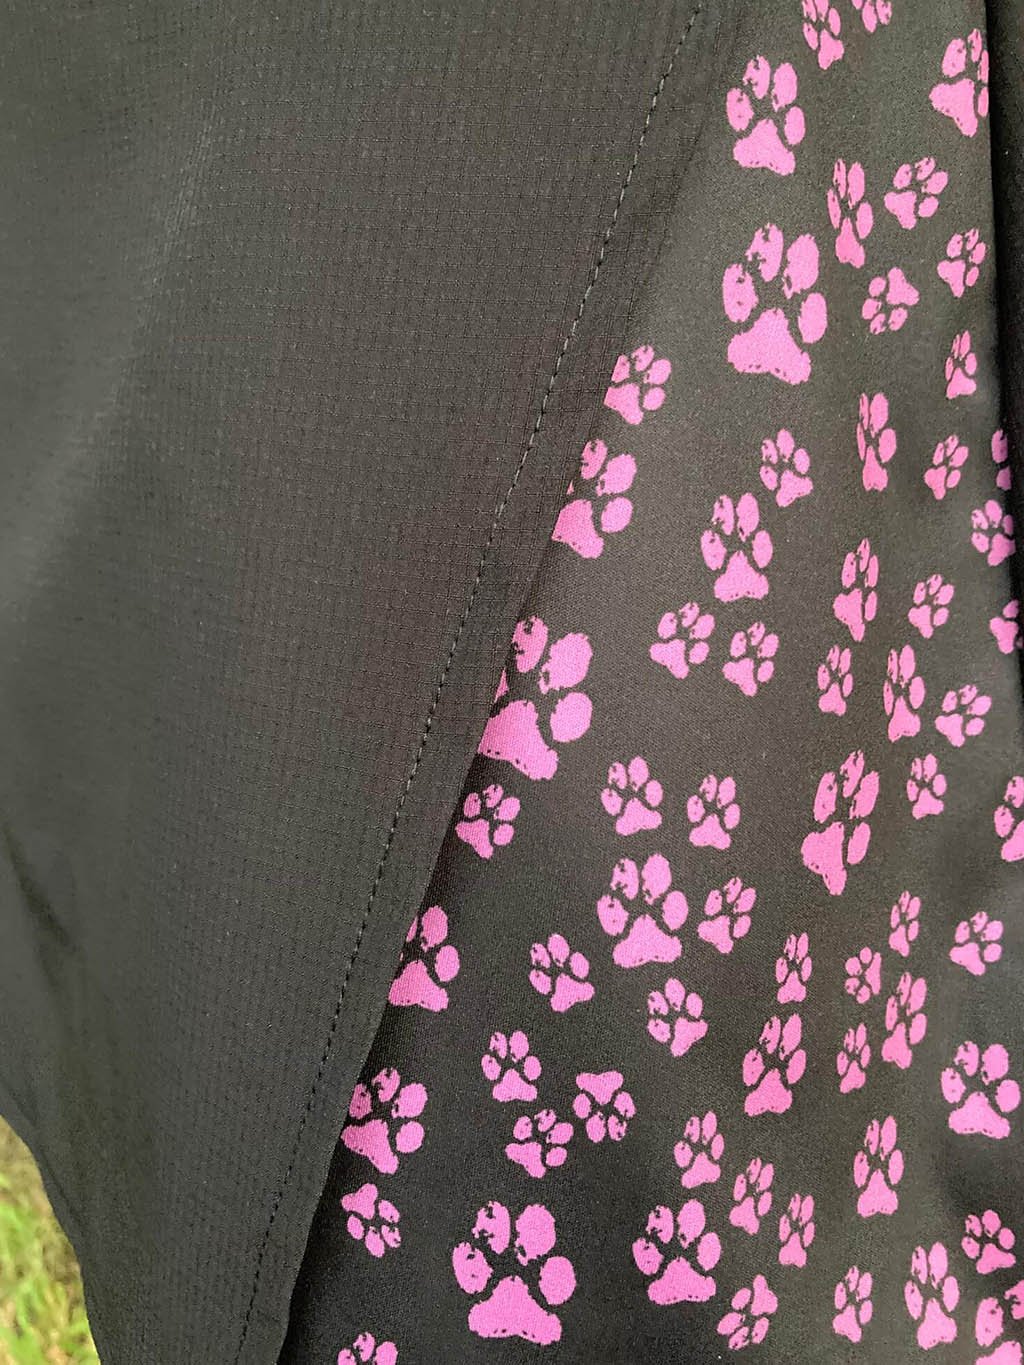 Skirt with 3/4 length leggings - black with lavender paws